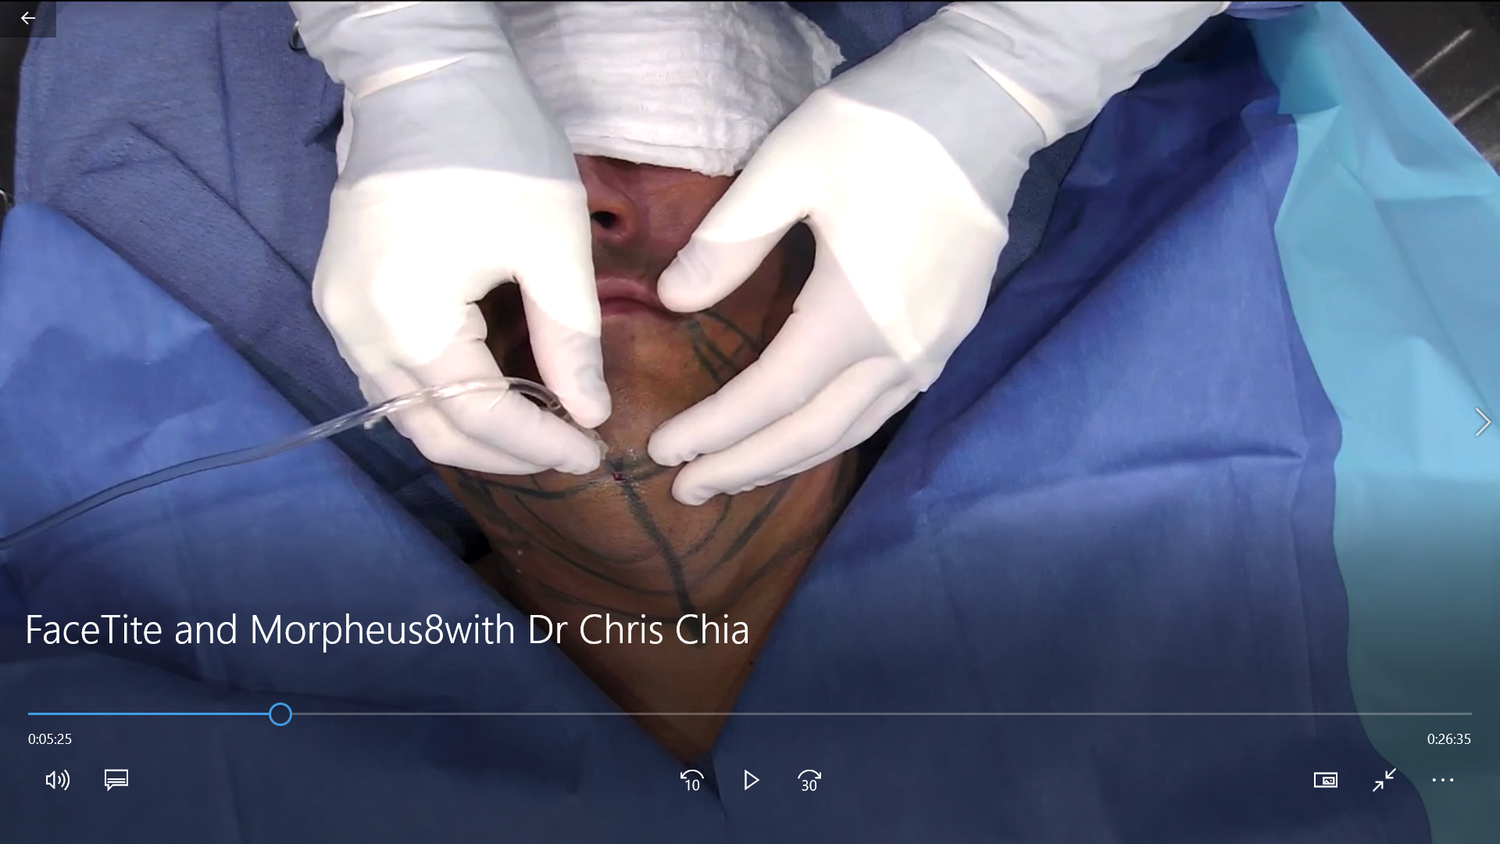 FaceTite and Morpheus8 with Dr Chris Chia